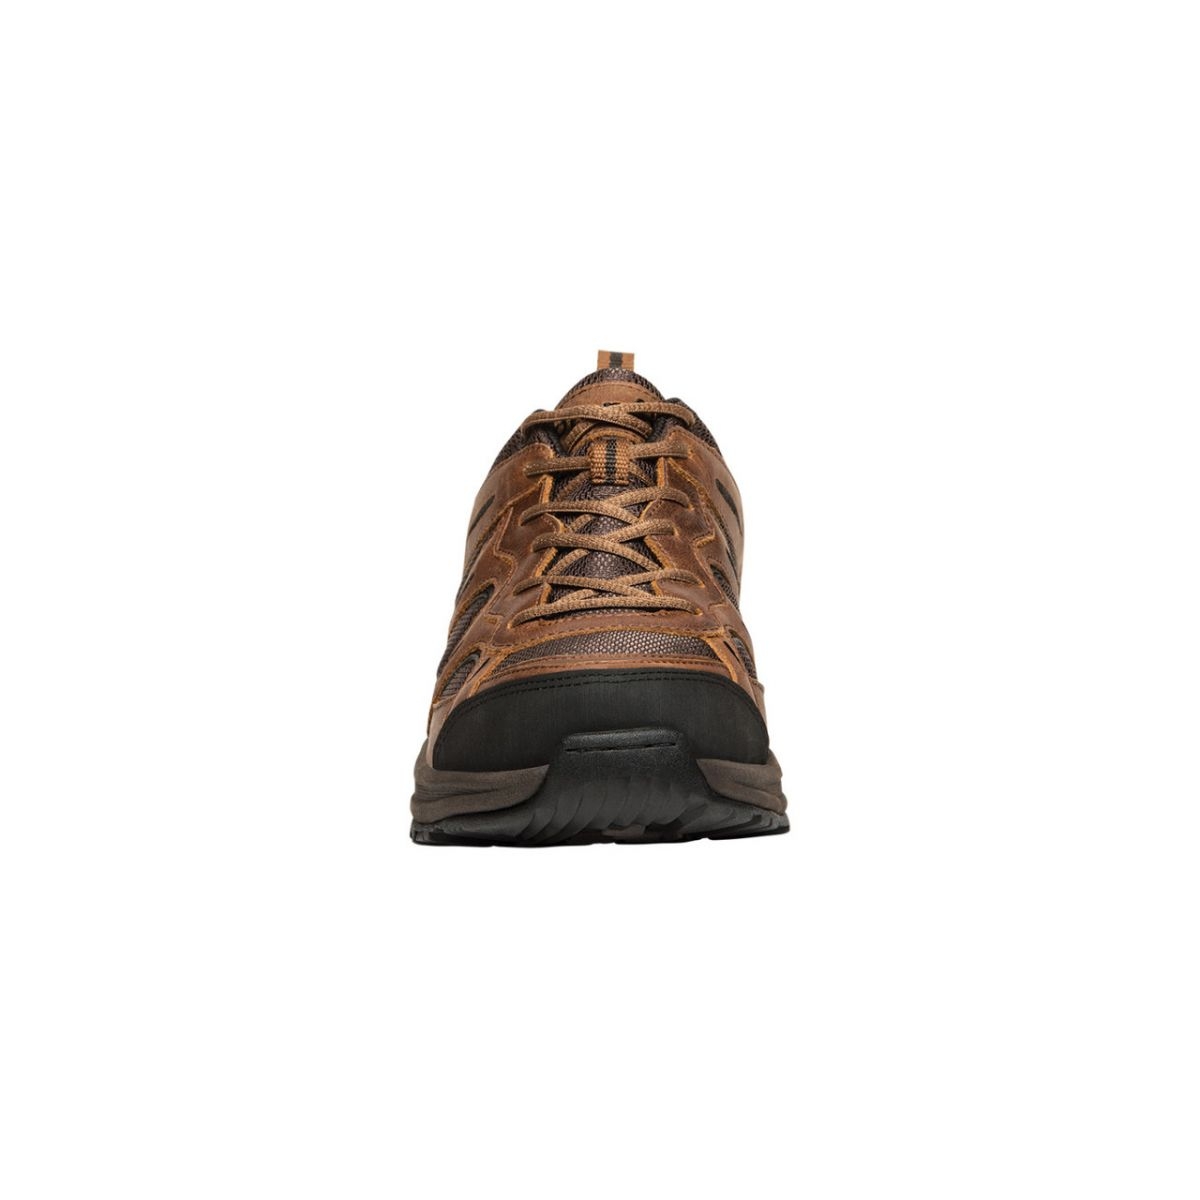 Propet Men's Connelly Hiking Shoe Brown - M5503BR BROWN - BROWN, 12-3E